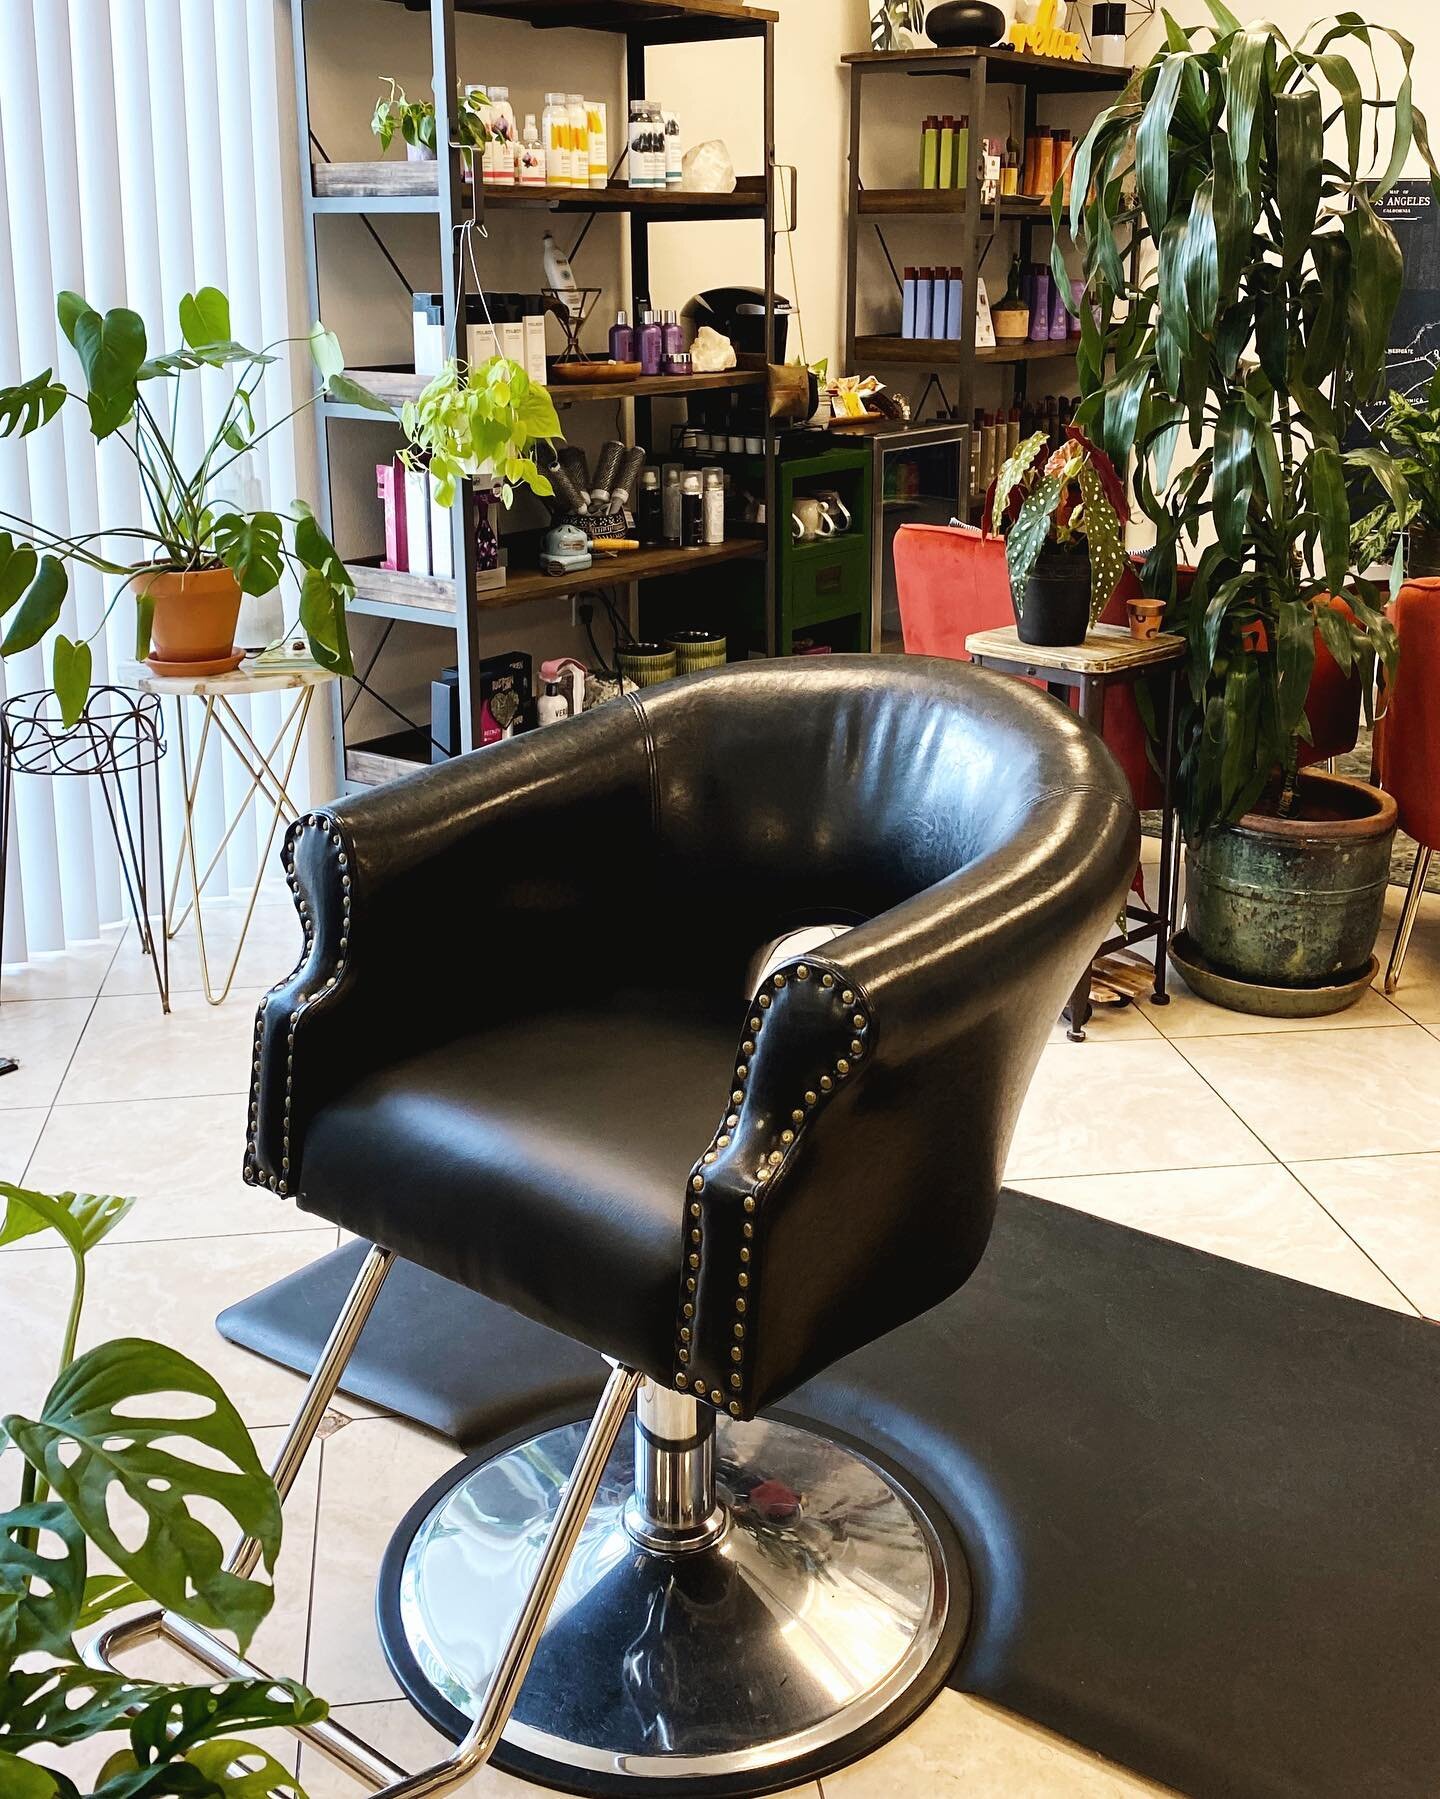 Hair Stylist what dose your career look like after CV-19? 
We are searching for passionate stylist to share our intimate space for greater opportunities of connection with your Craft + Guests. Habitat was created with the stylist in mind, think of it